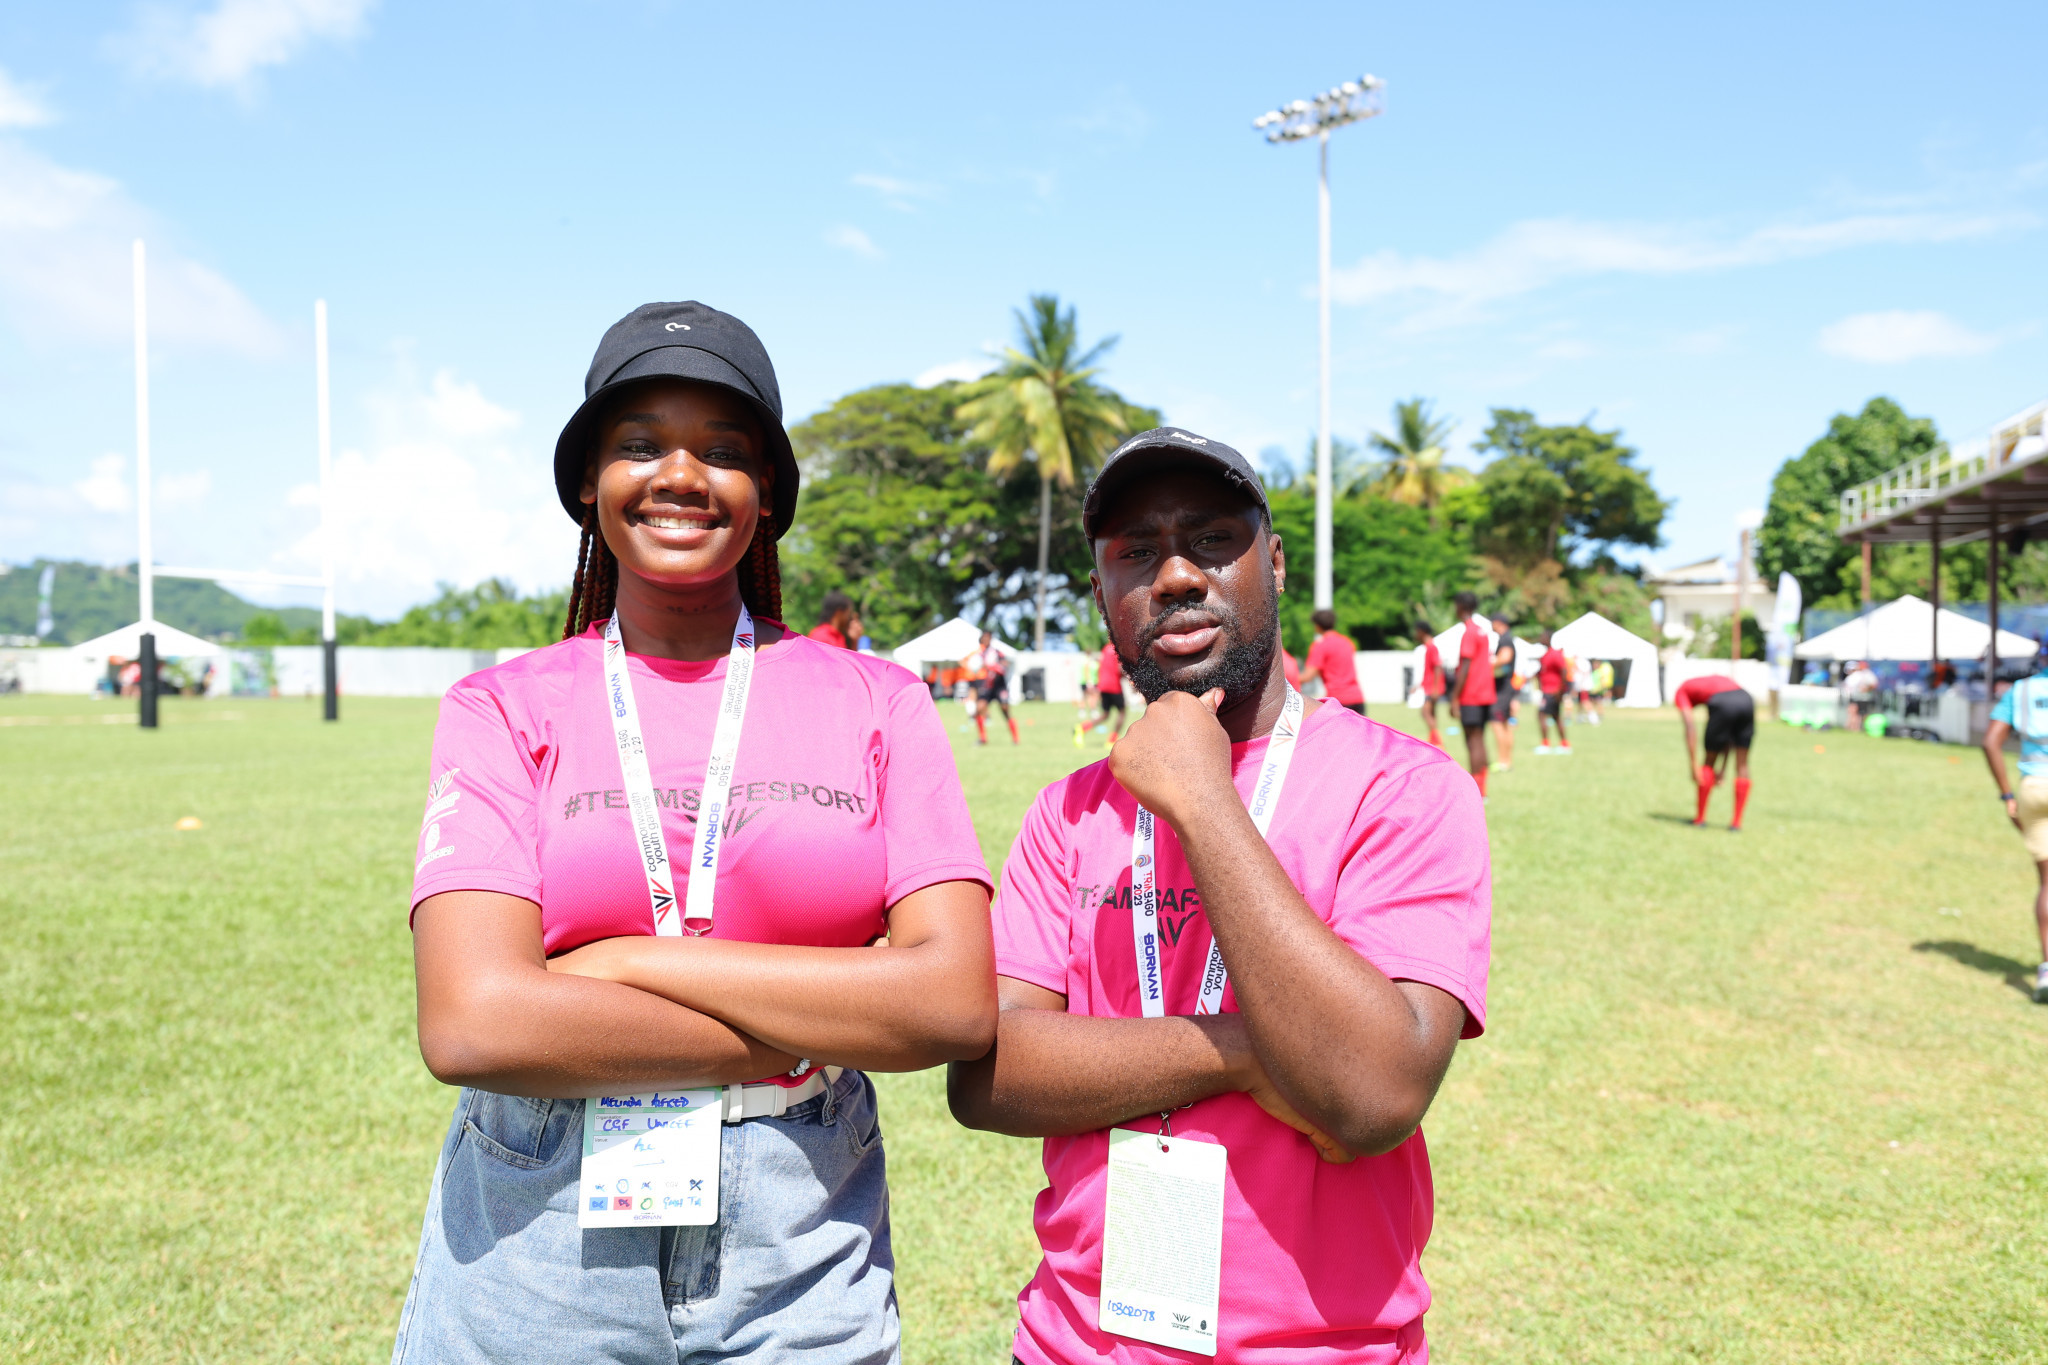 Participants celebrated Safe Sport Day at venues across Trinidad and Tobago ©CGF/Getty Images